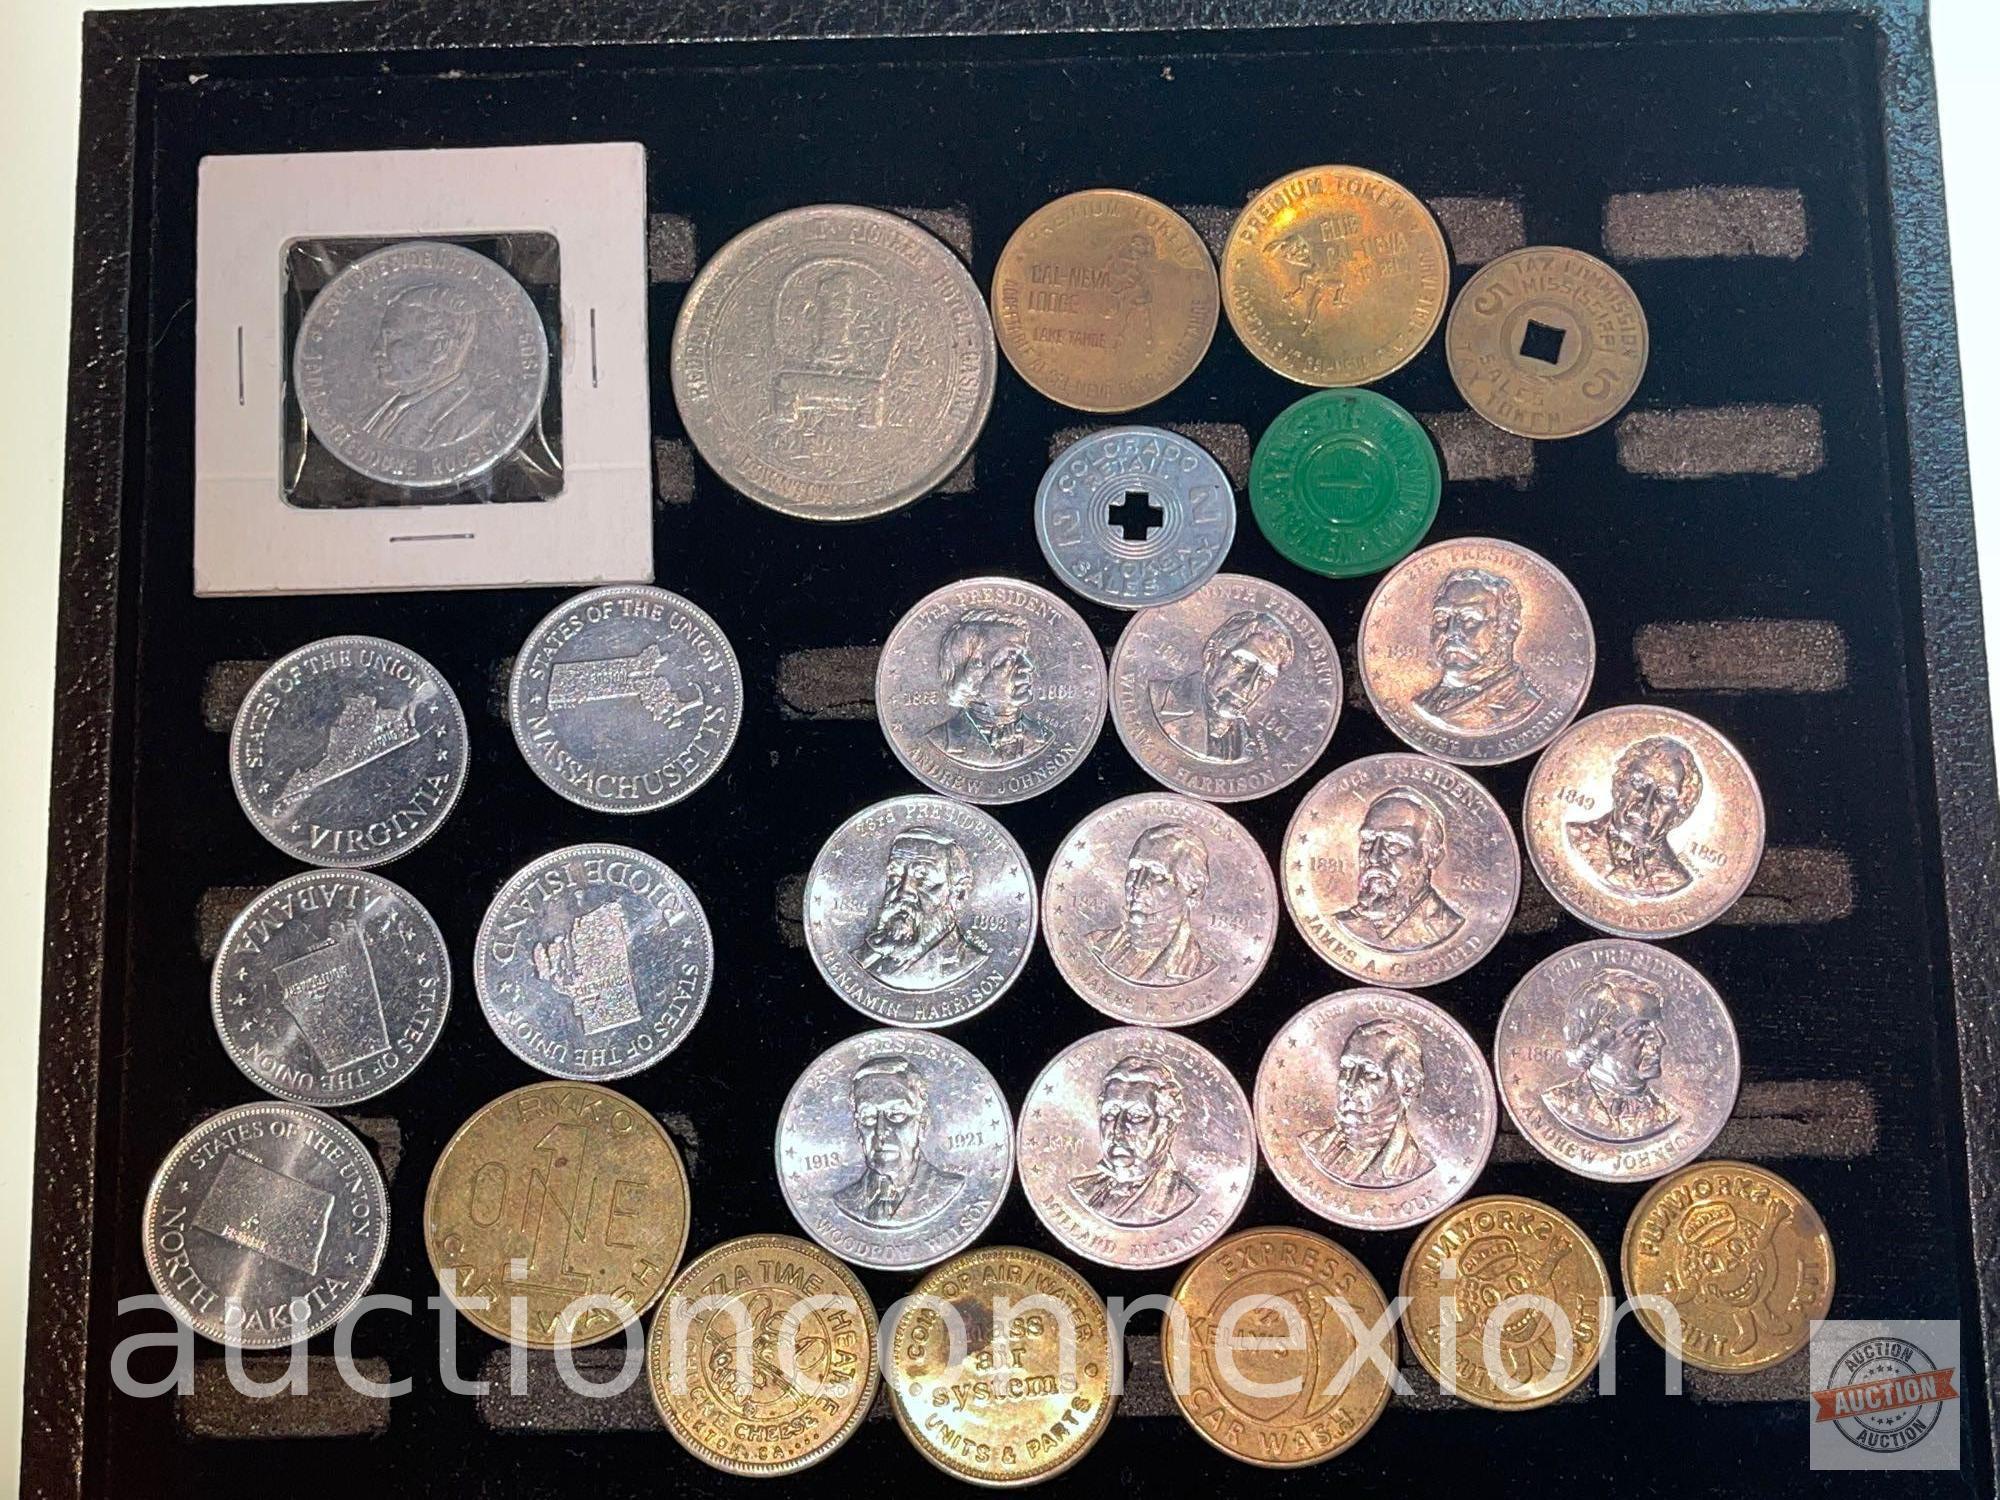 Coins - Misc. tokens, casino token, state coins, president coins, tax token, shell, Lake Tahoe